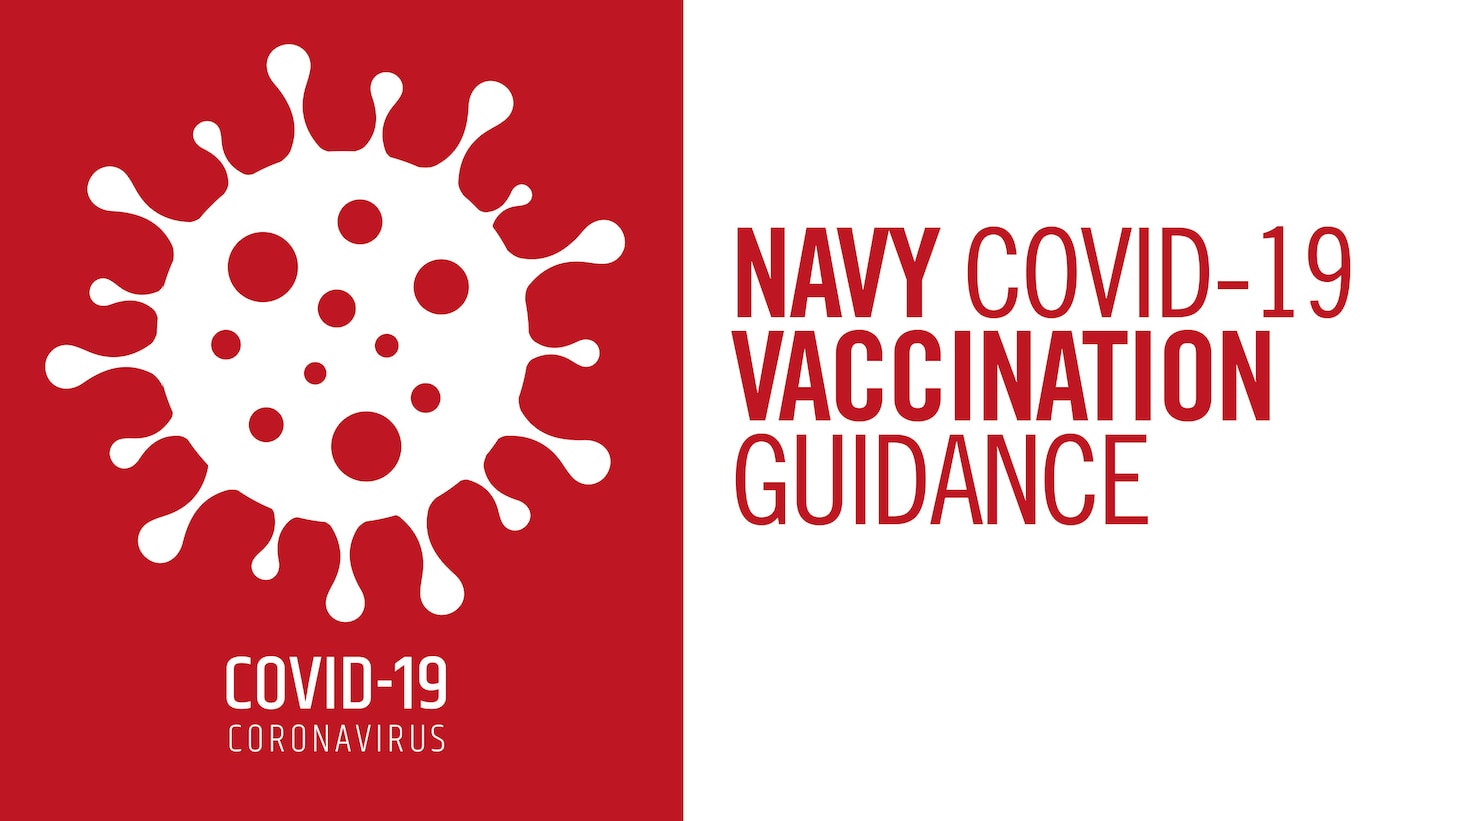 Navy COVID-19 Vaccination, Reserve Force Guidance Released